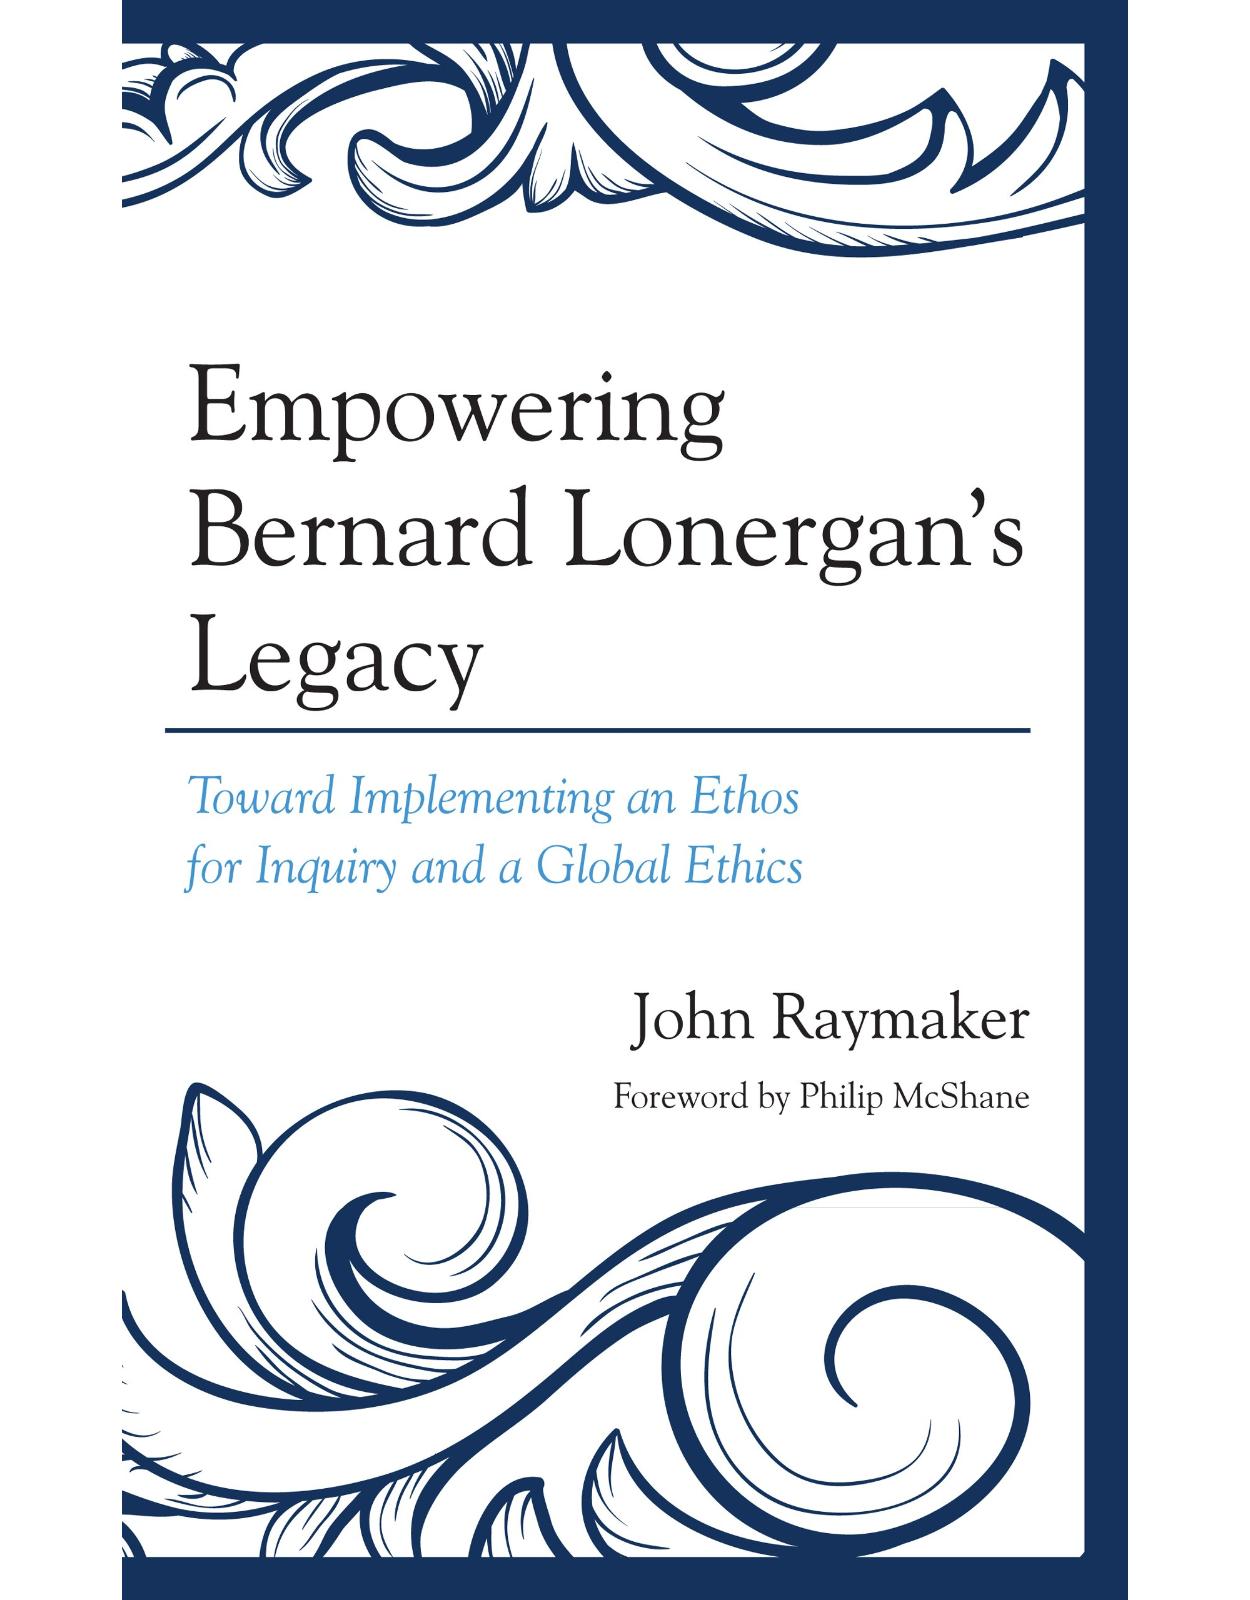 Empowering Bernard Lonergan's Legacy: Toward Implementing an Ethos for Inquiry and a Global Ethics